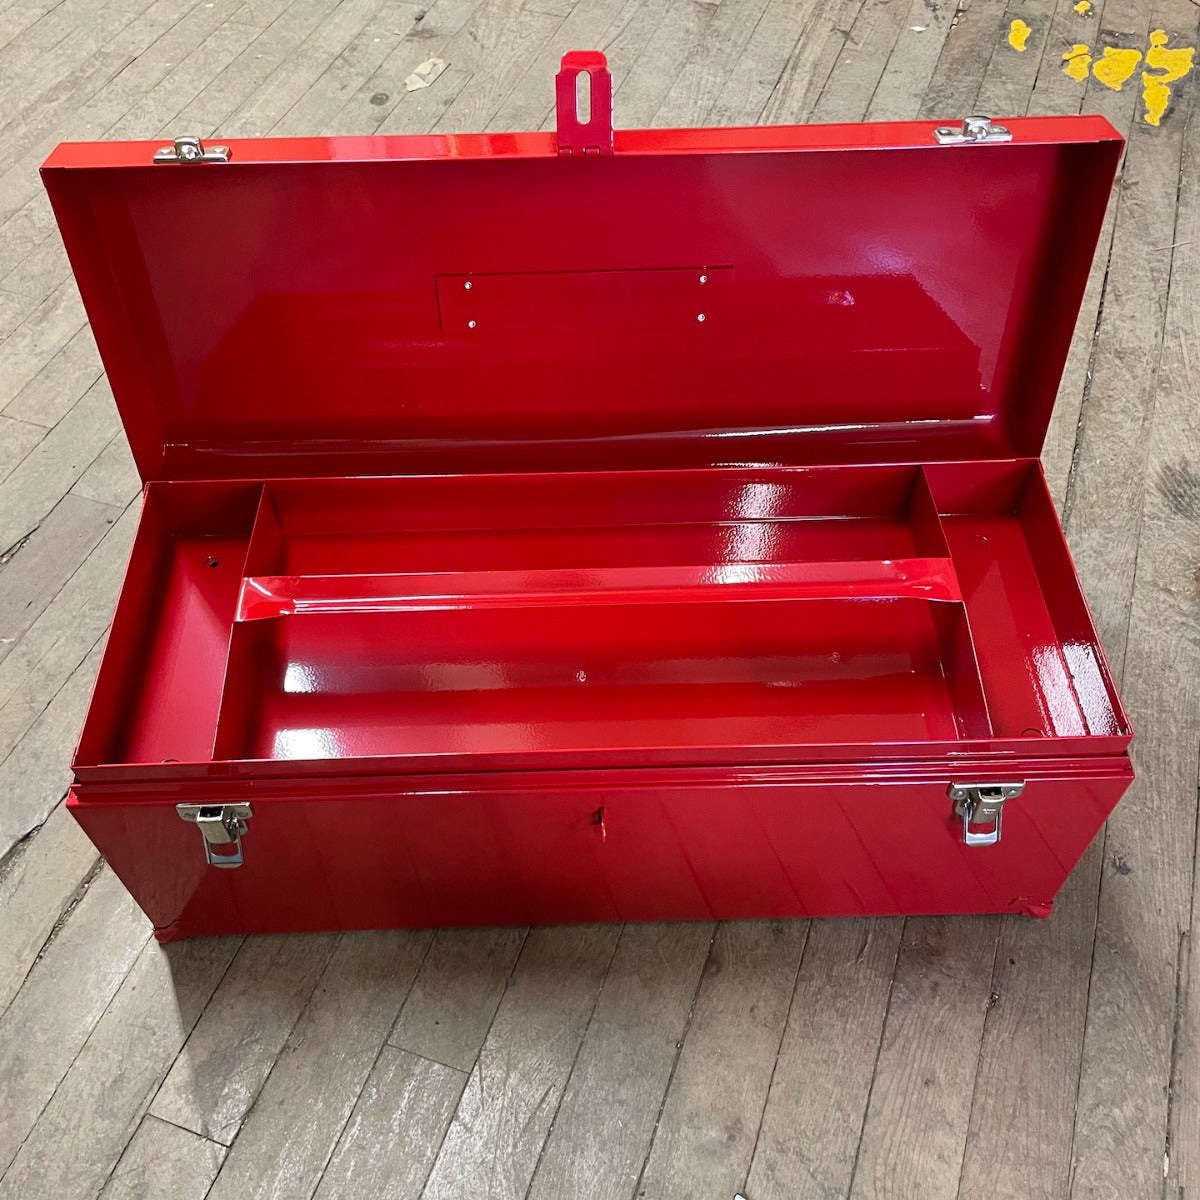 Valley Red Metal Tool Box w/ Handle and Tray 22 1/2" x 8 1/2" x 9" (VRMTB)